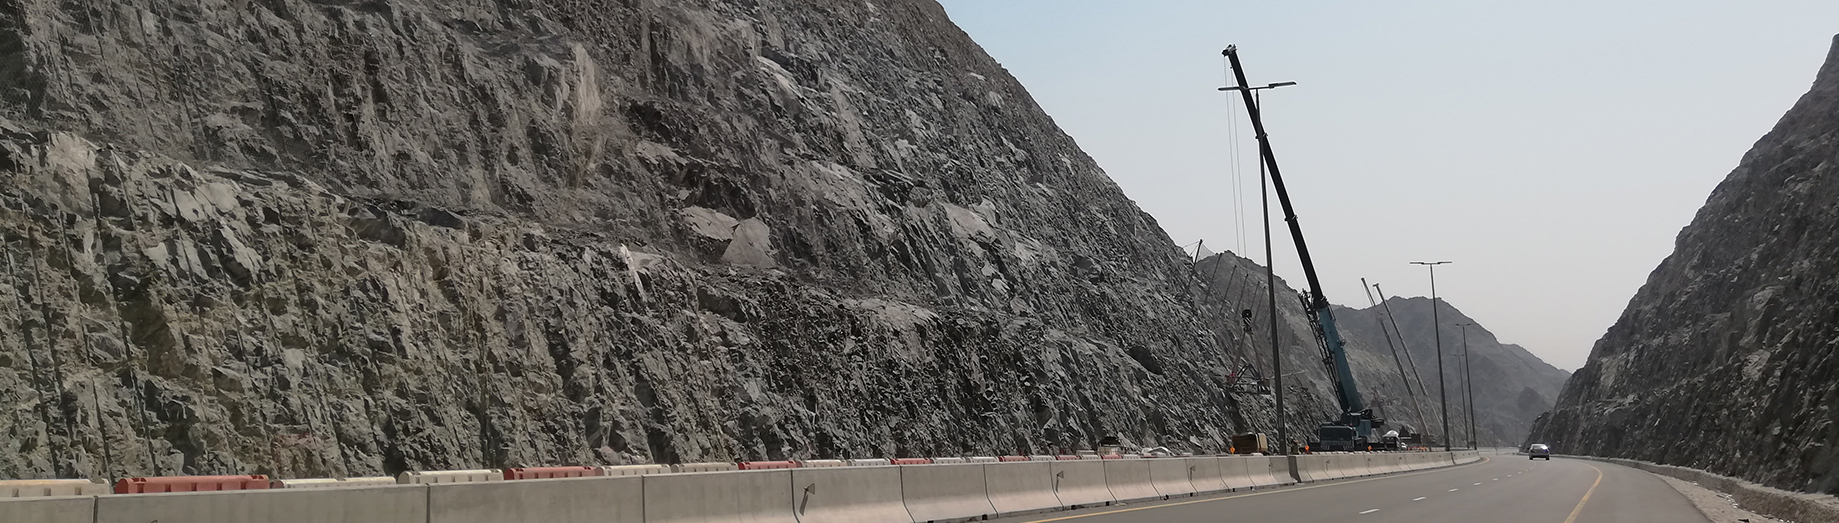 Treatment, Protection & Rock Stabilization of Yabsa Bypass Road